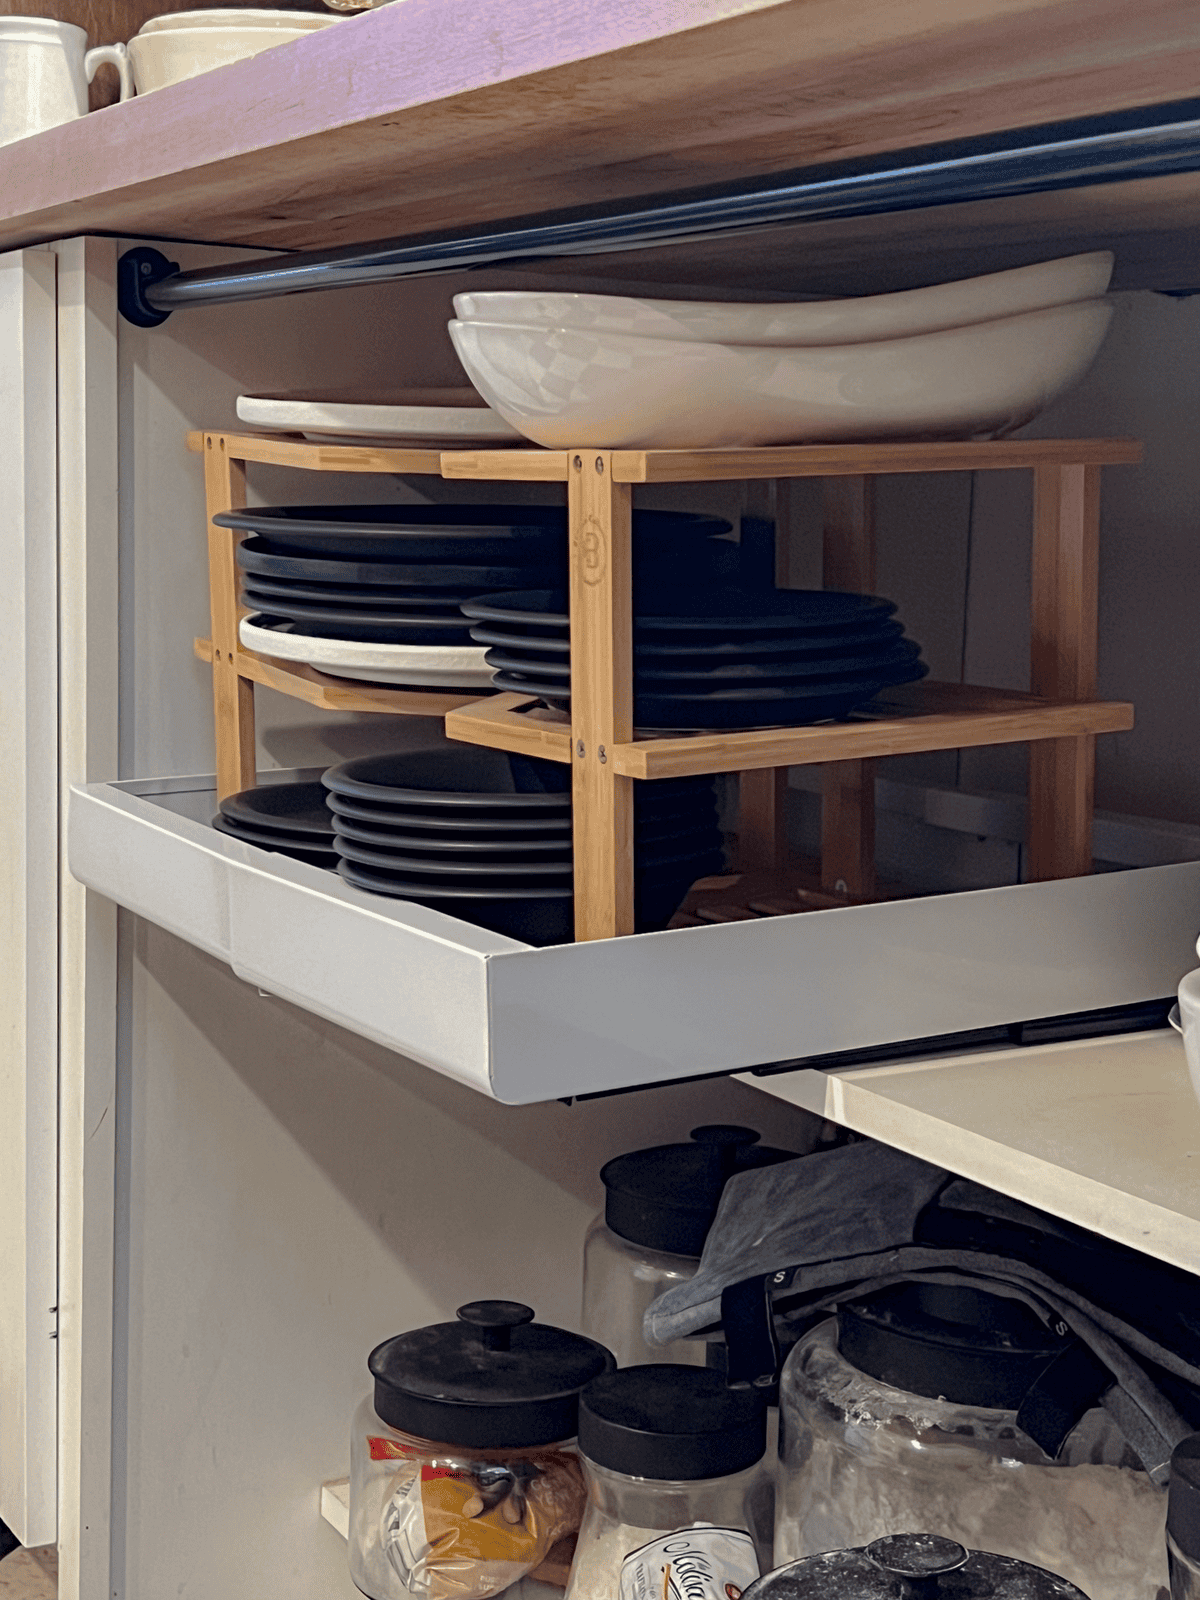 Stick down metal pull out shelf for cabinets.